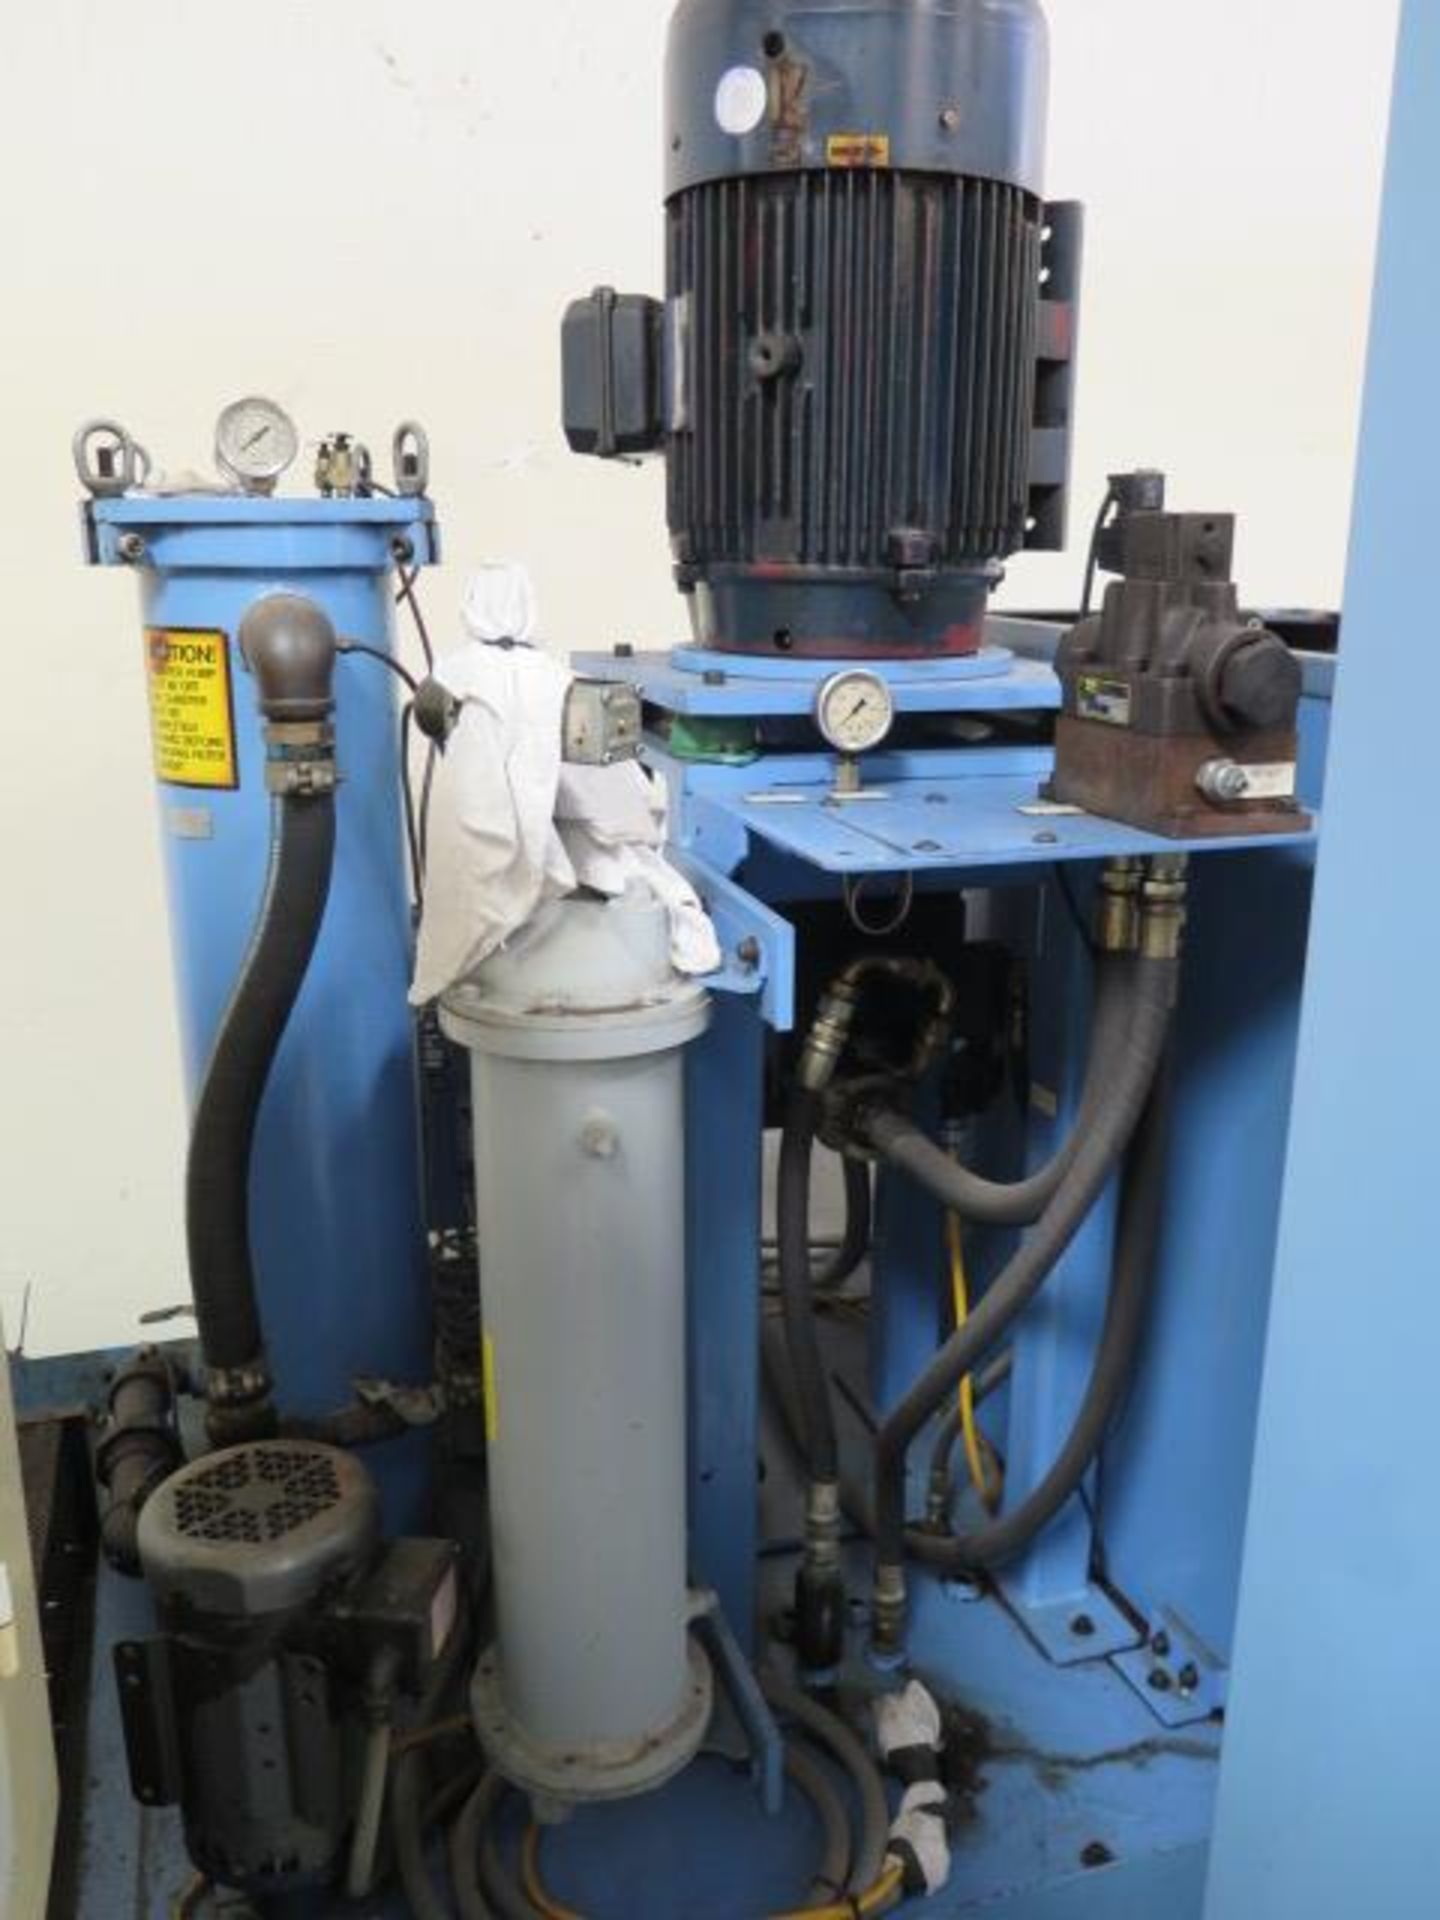 DeHoff 1536 CNC Gun Drilling Machine w/ Allen Bradley PanelView 550 Controls, 12” Jaw, SOLD AS IS - Image 16 of 19